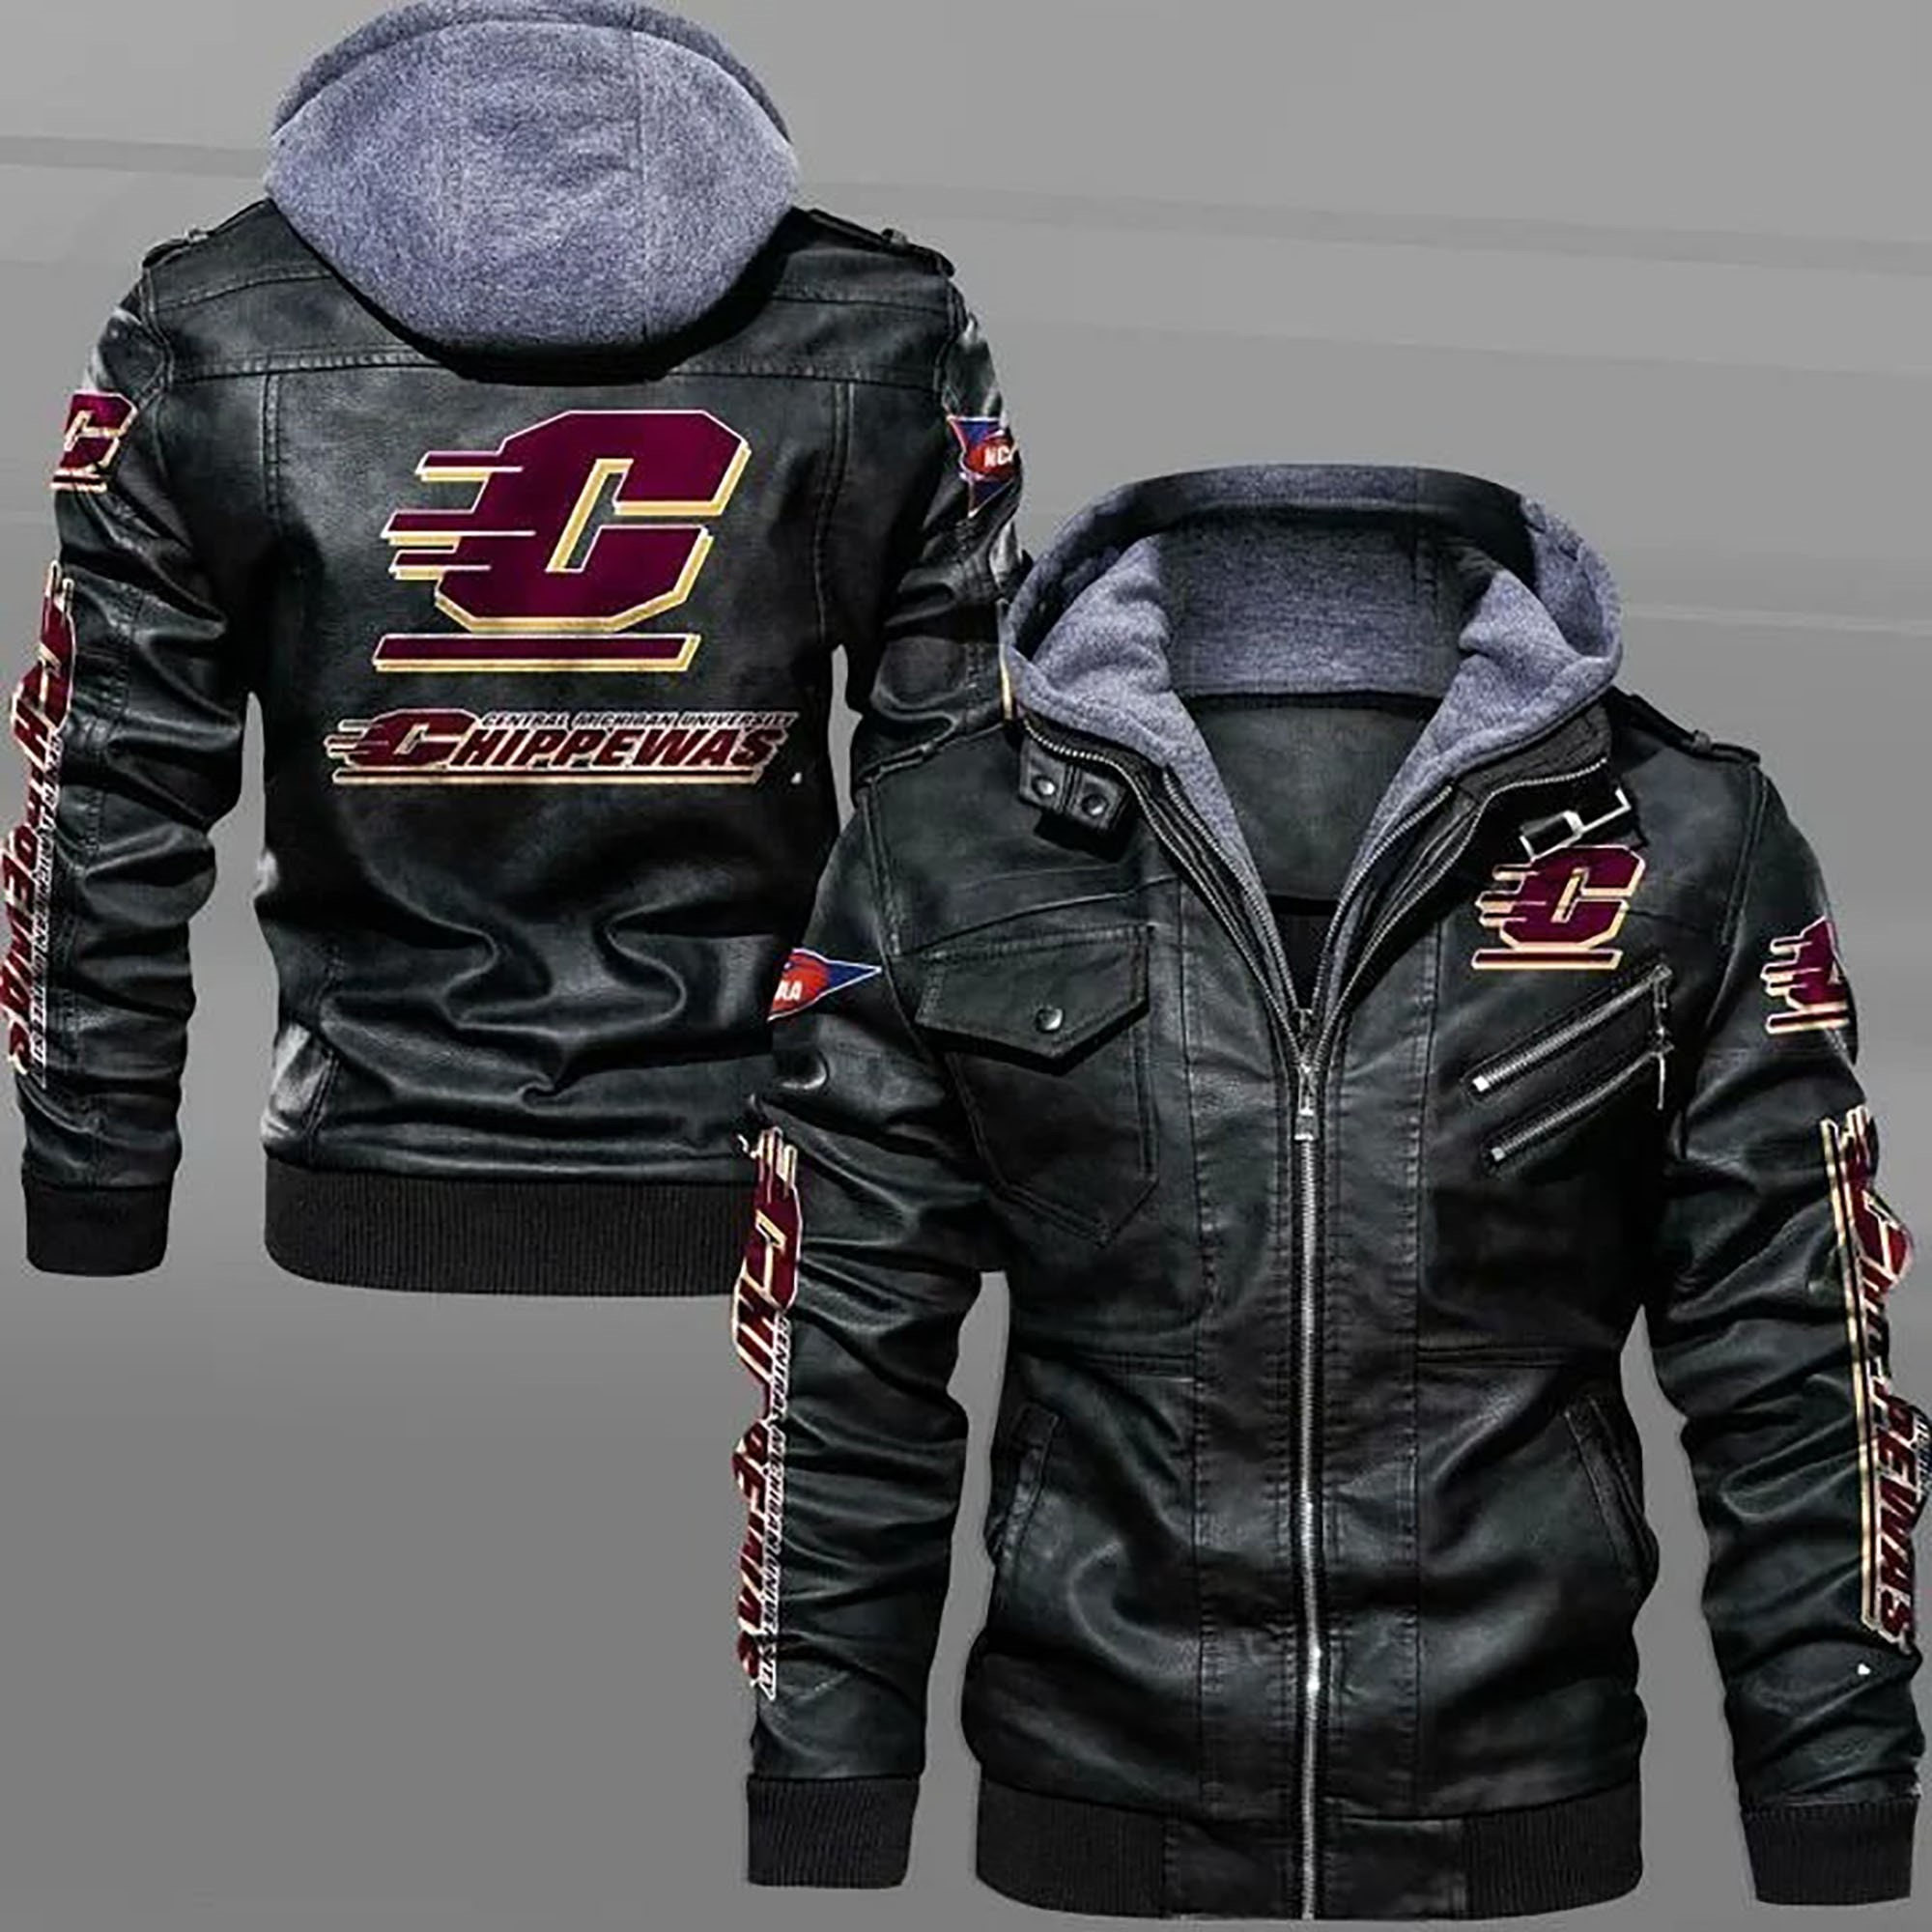 These Amazing Leather Jacket will add to the appeal of your outfit 205